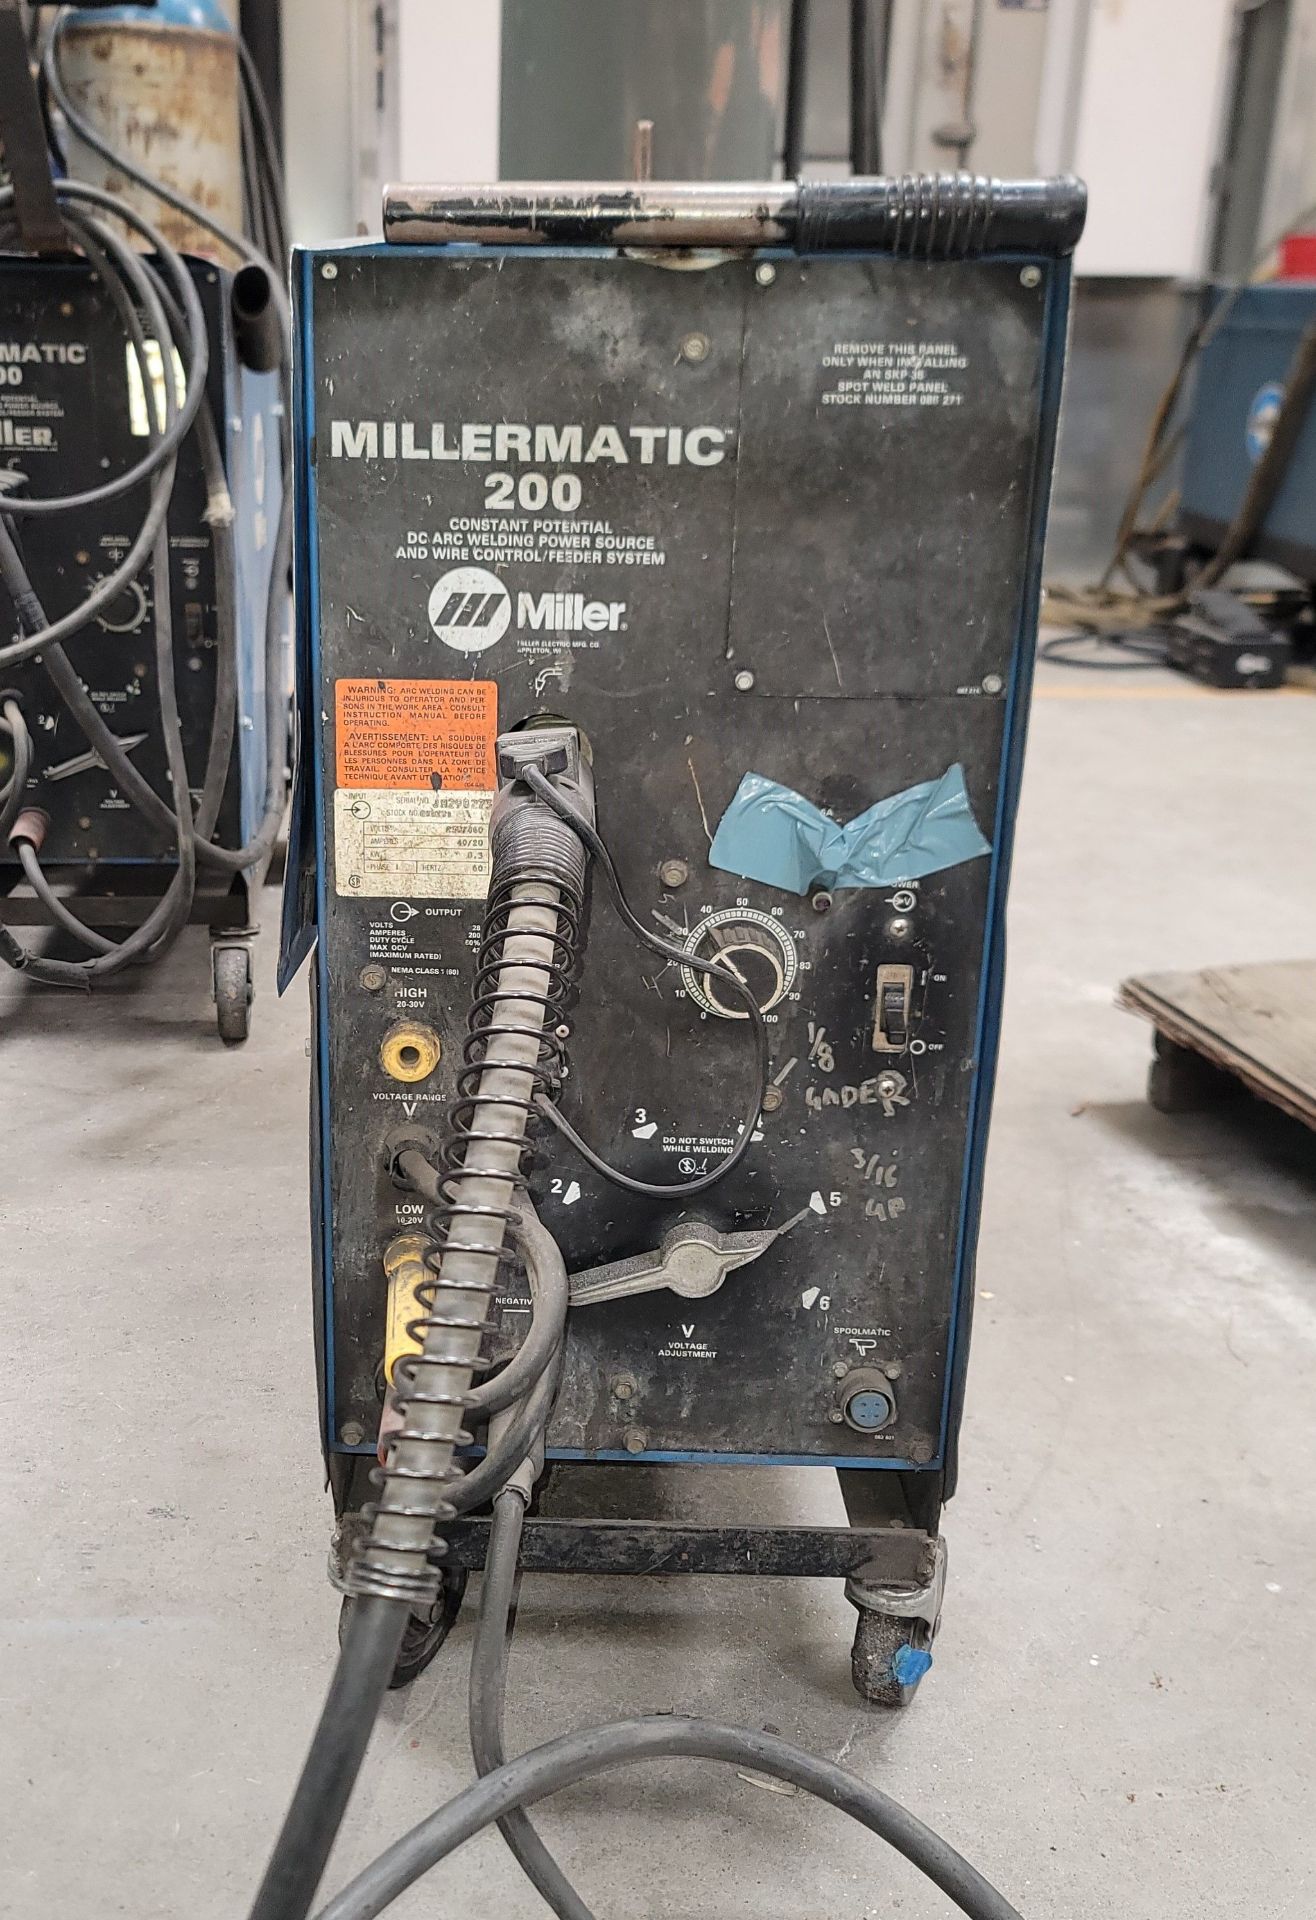 MILLERMATIC 200 WELDING POWER SOURCE, STOCK NO. 048291, S/N JH298273, GAS CYLINDER NOT INCLUDED - Image 3 of 3